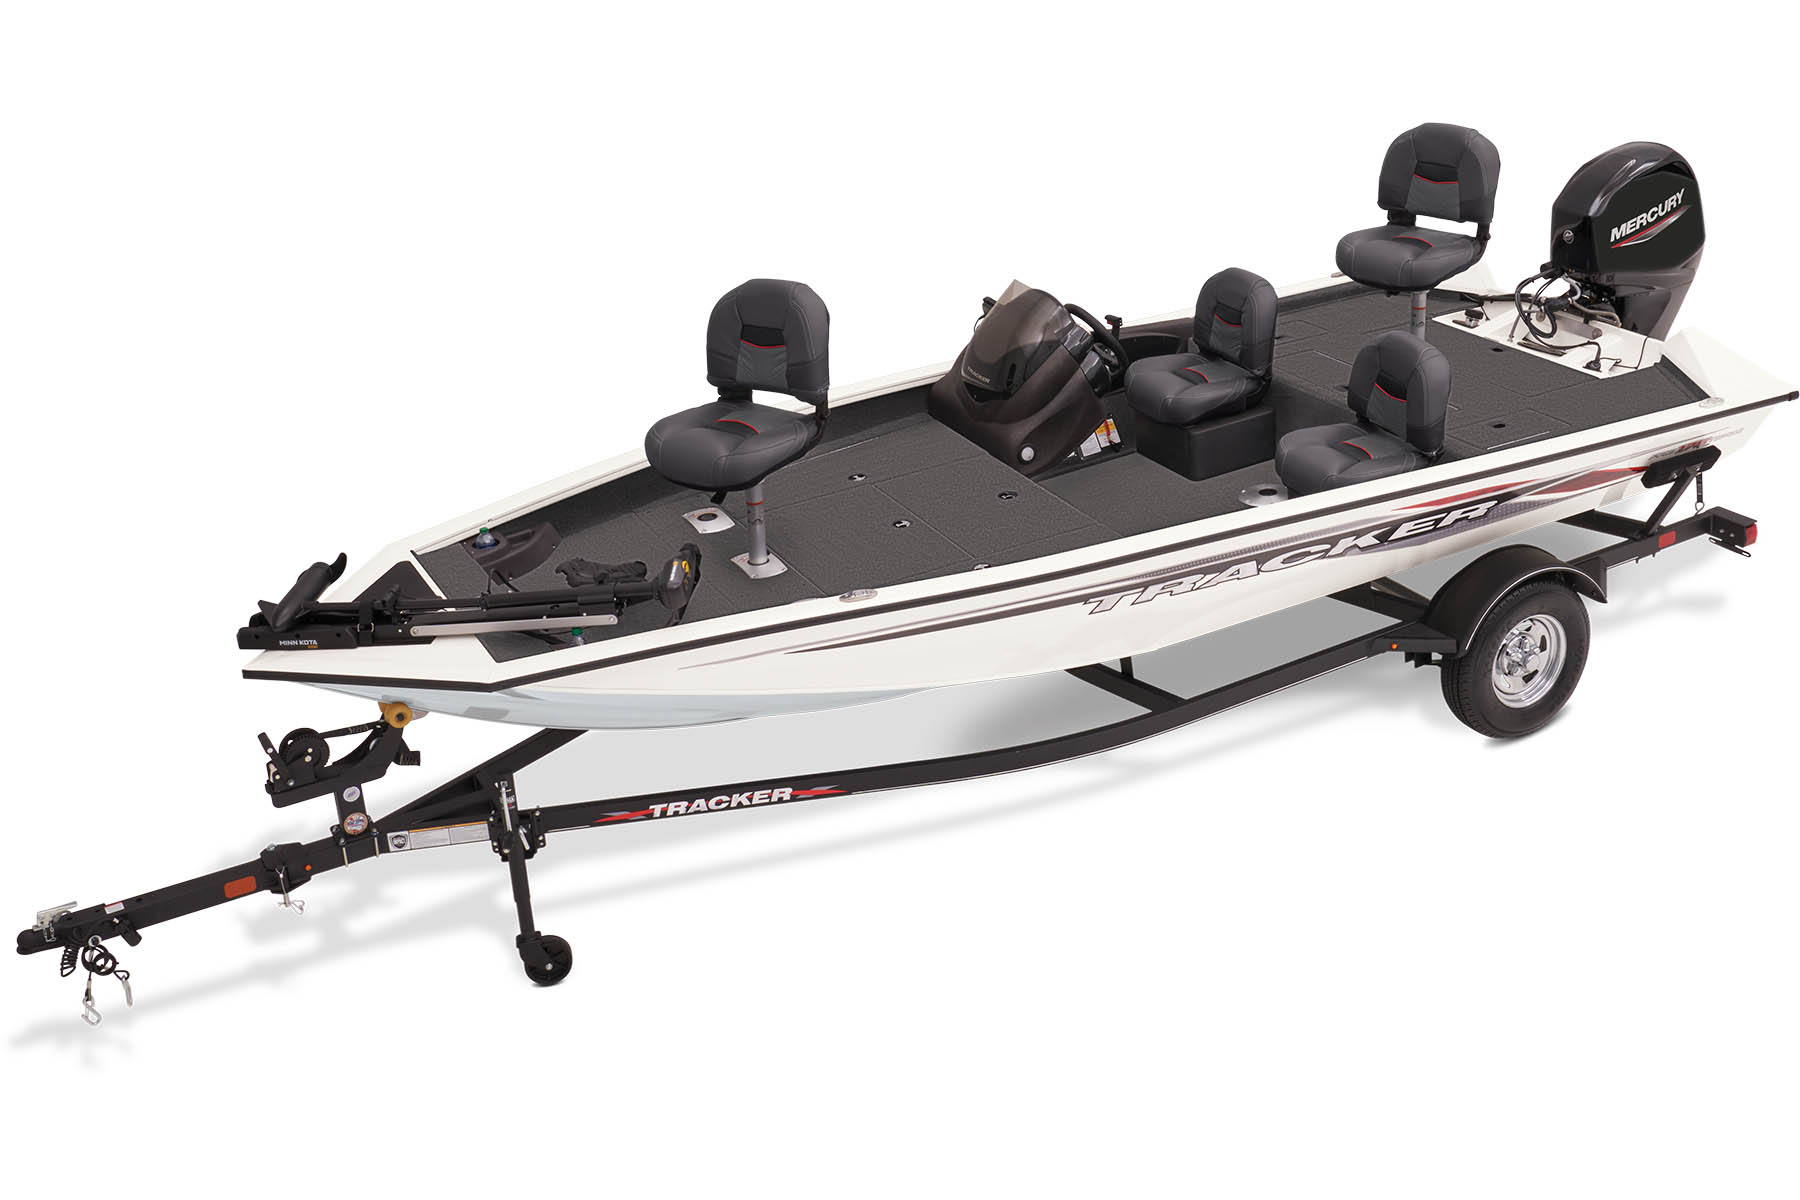 Is a Bass Boat Right for You?